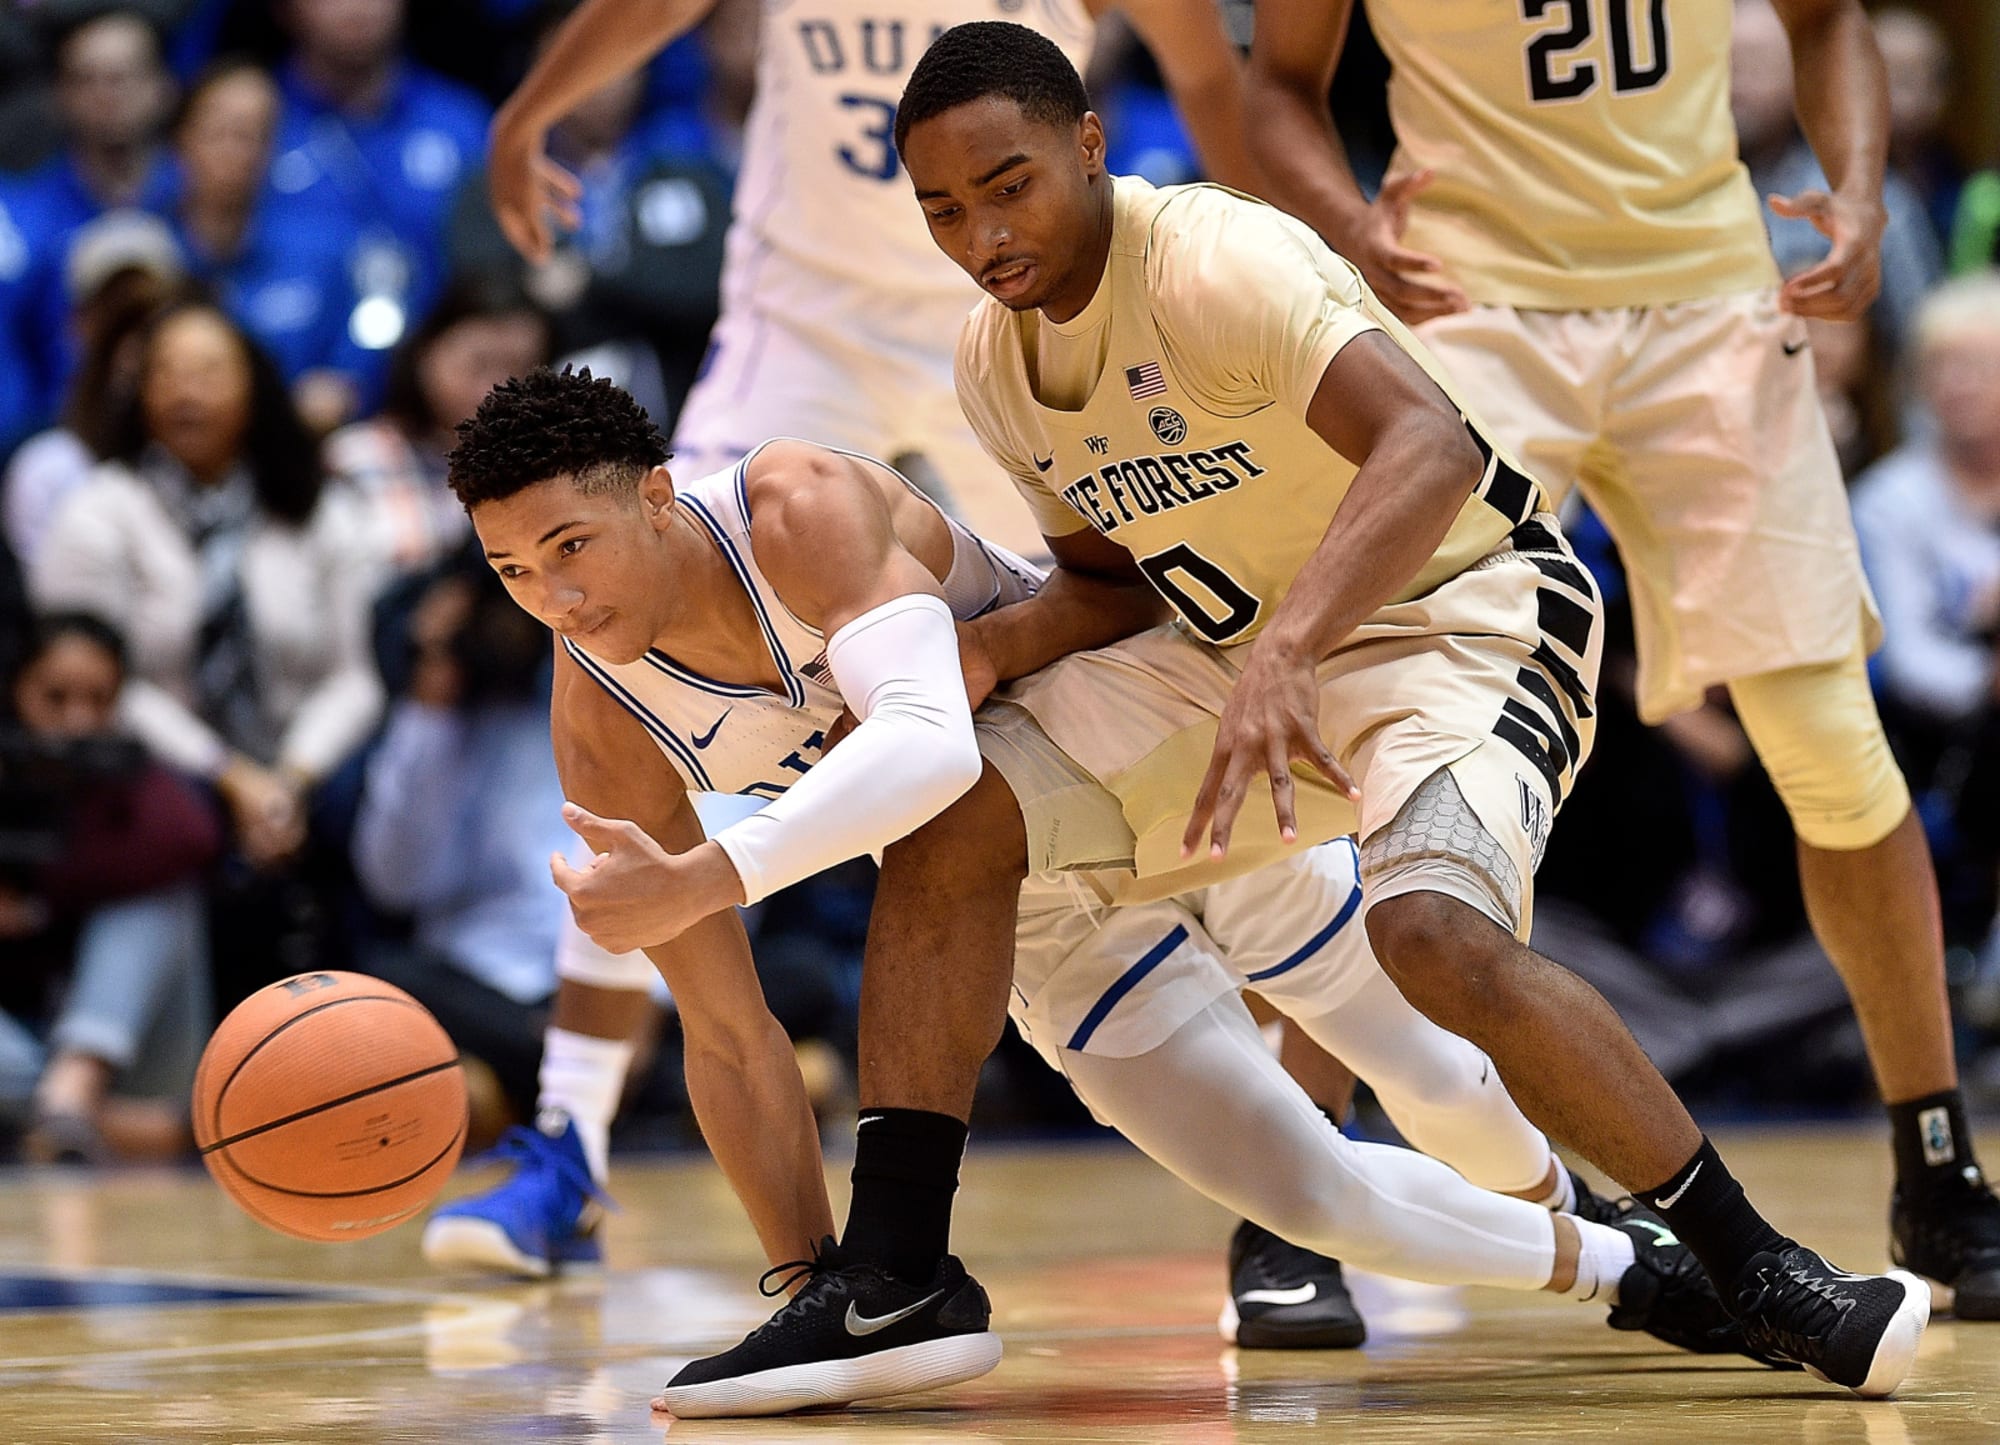 Wake Forest Basketball: 2018-19 season preview for the Demon Deacons